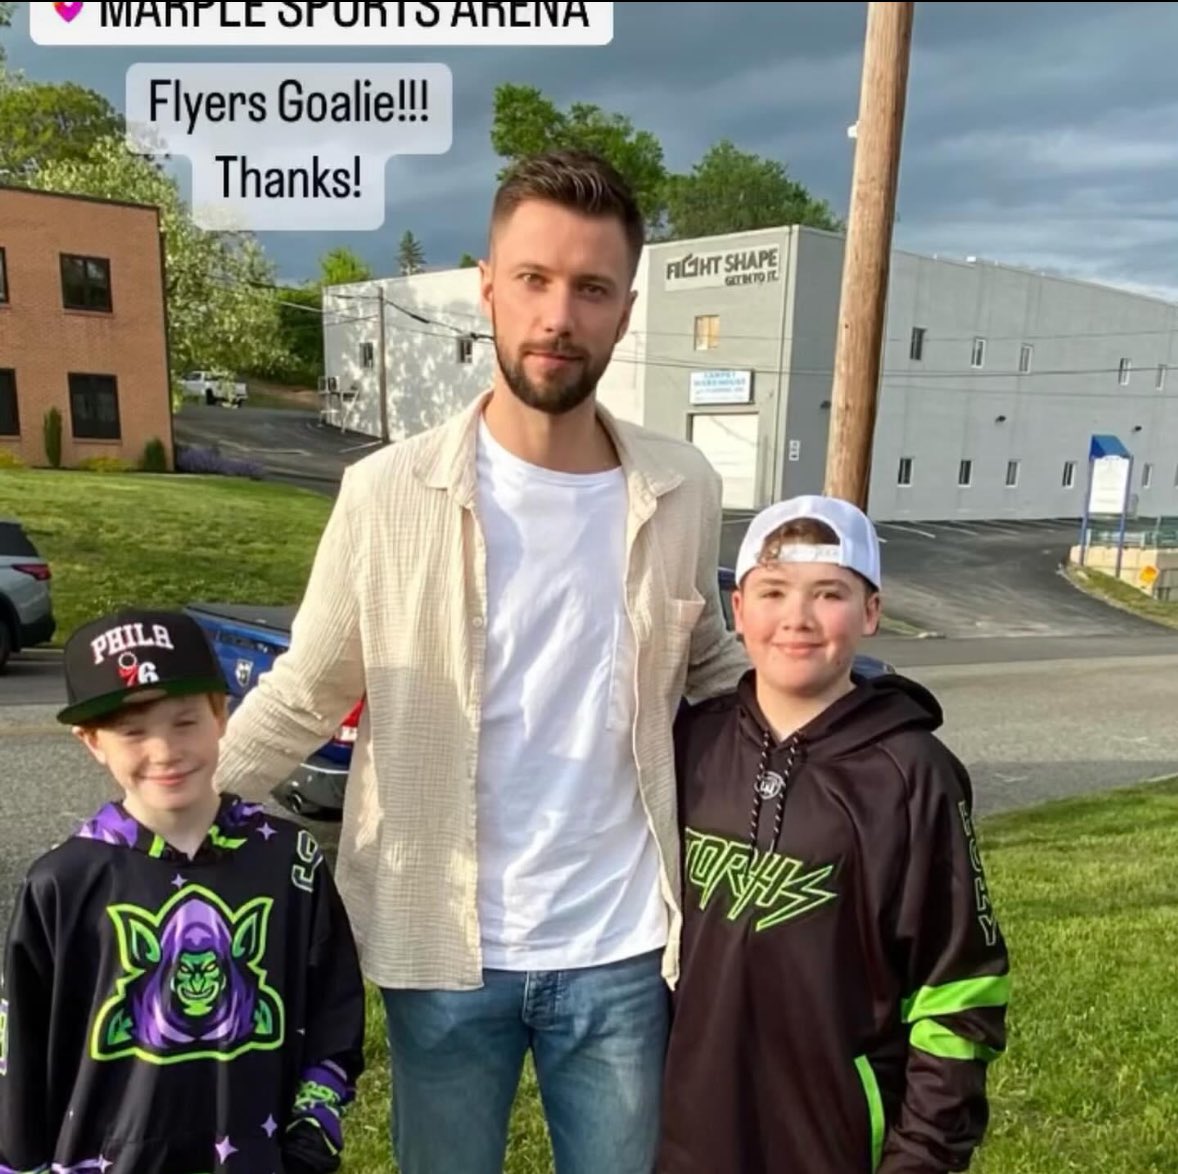 Another Ivan Fedotov spotting this offseason.

Fedotov was seen at Marple Sports Arena on the bench of a youth roller hockey game. He took some photos with the players after the game. 
#LetsGoFlyers